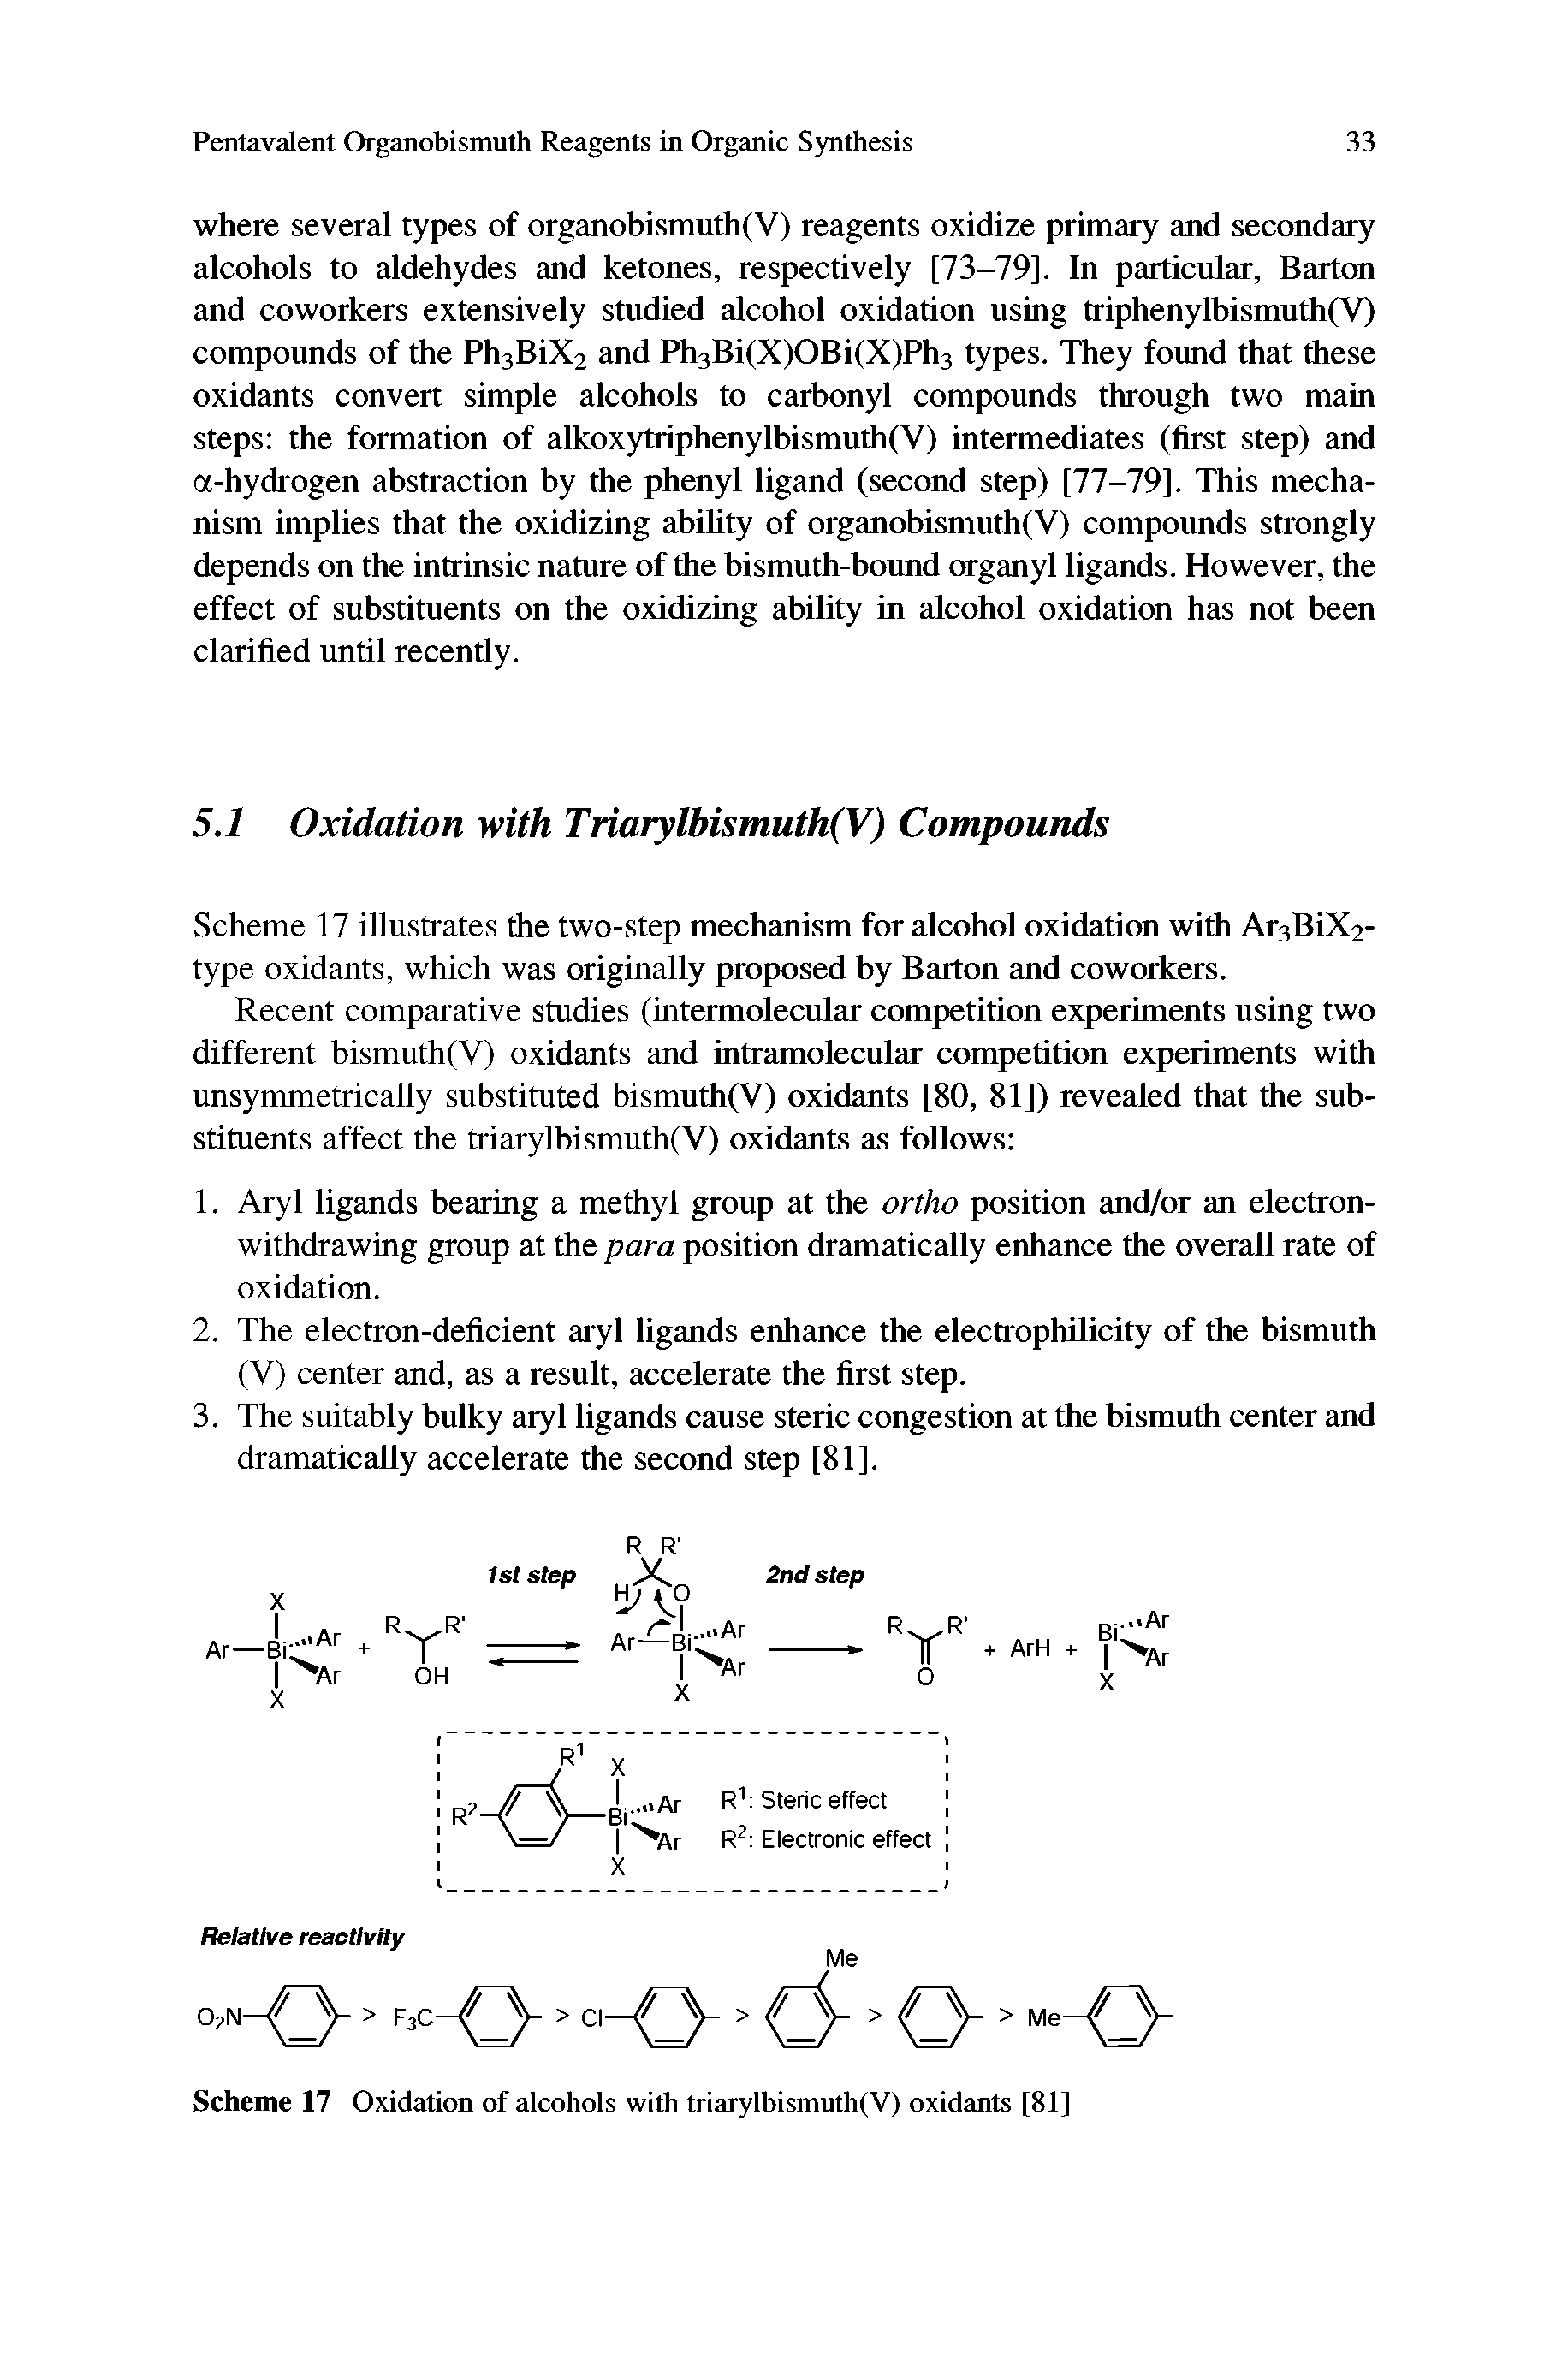 Scheme 17 Oxidation of alcohols with triarylbismuth(V) oxidants [81]...